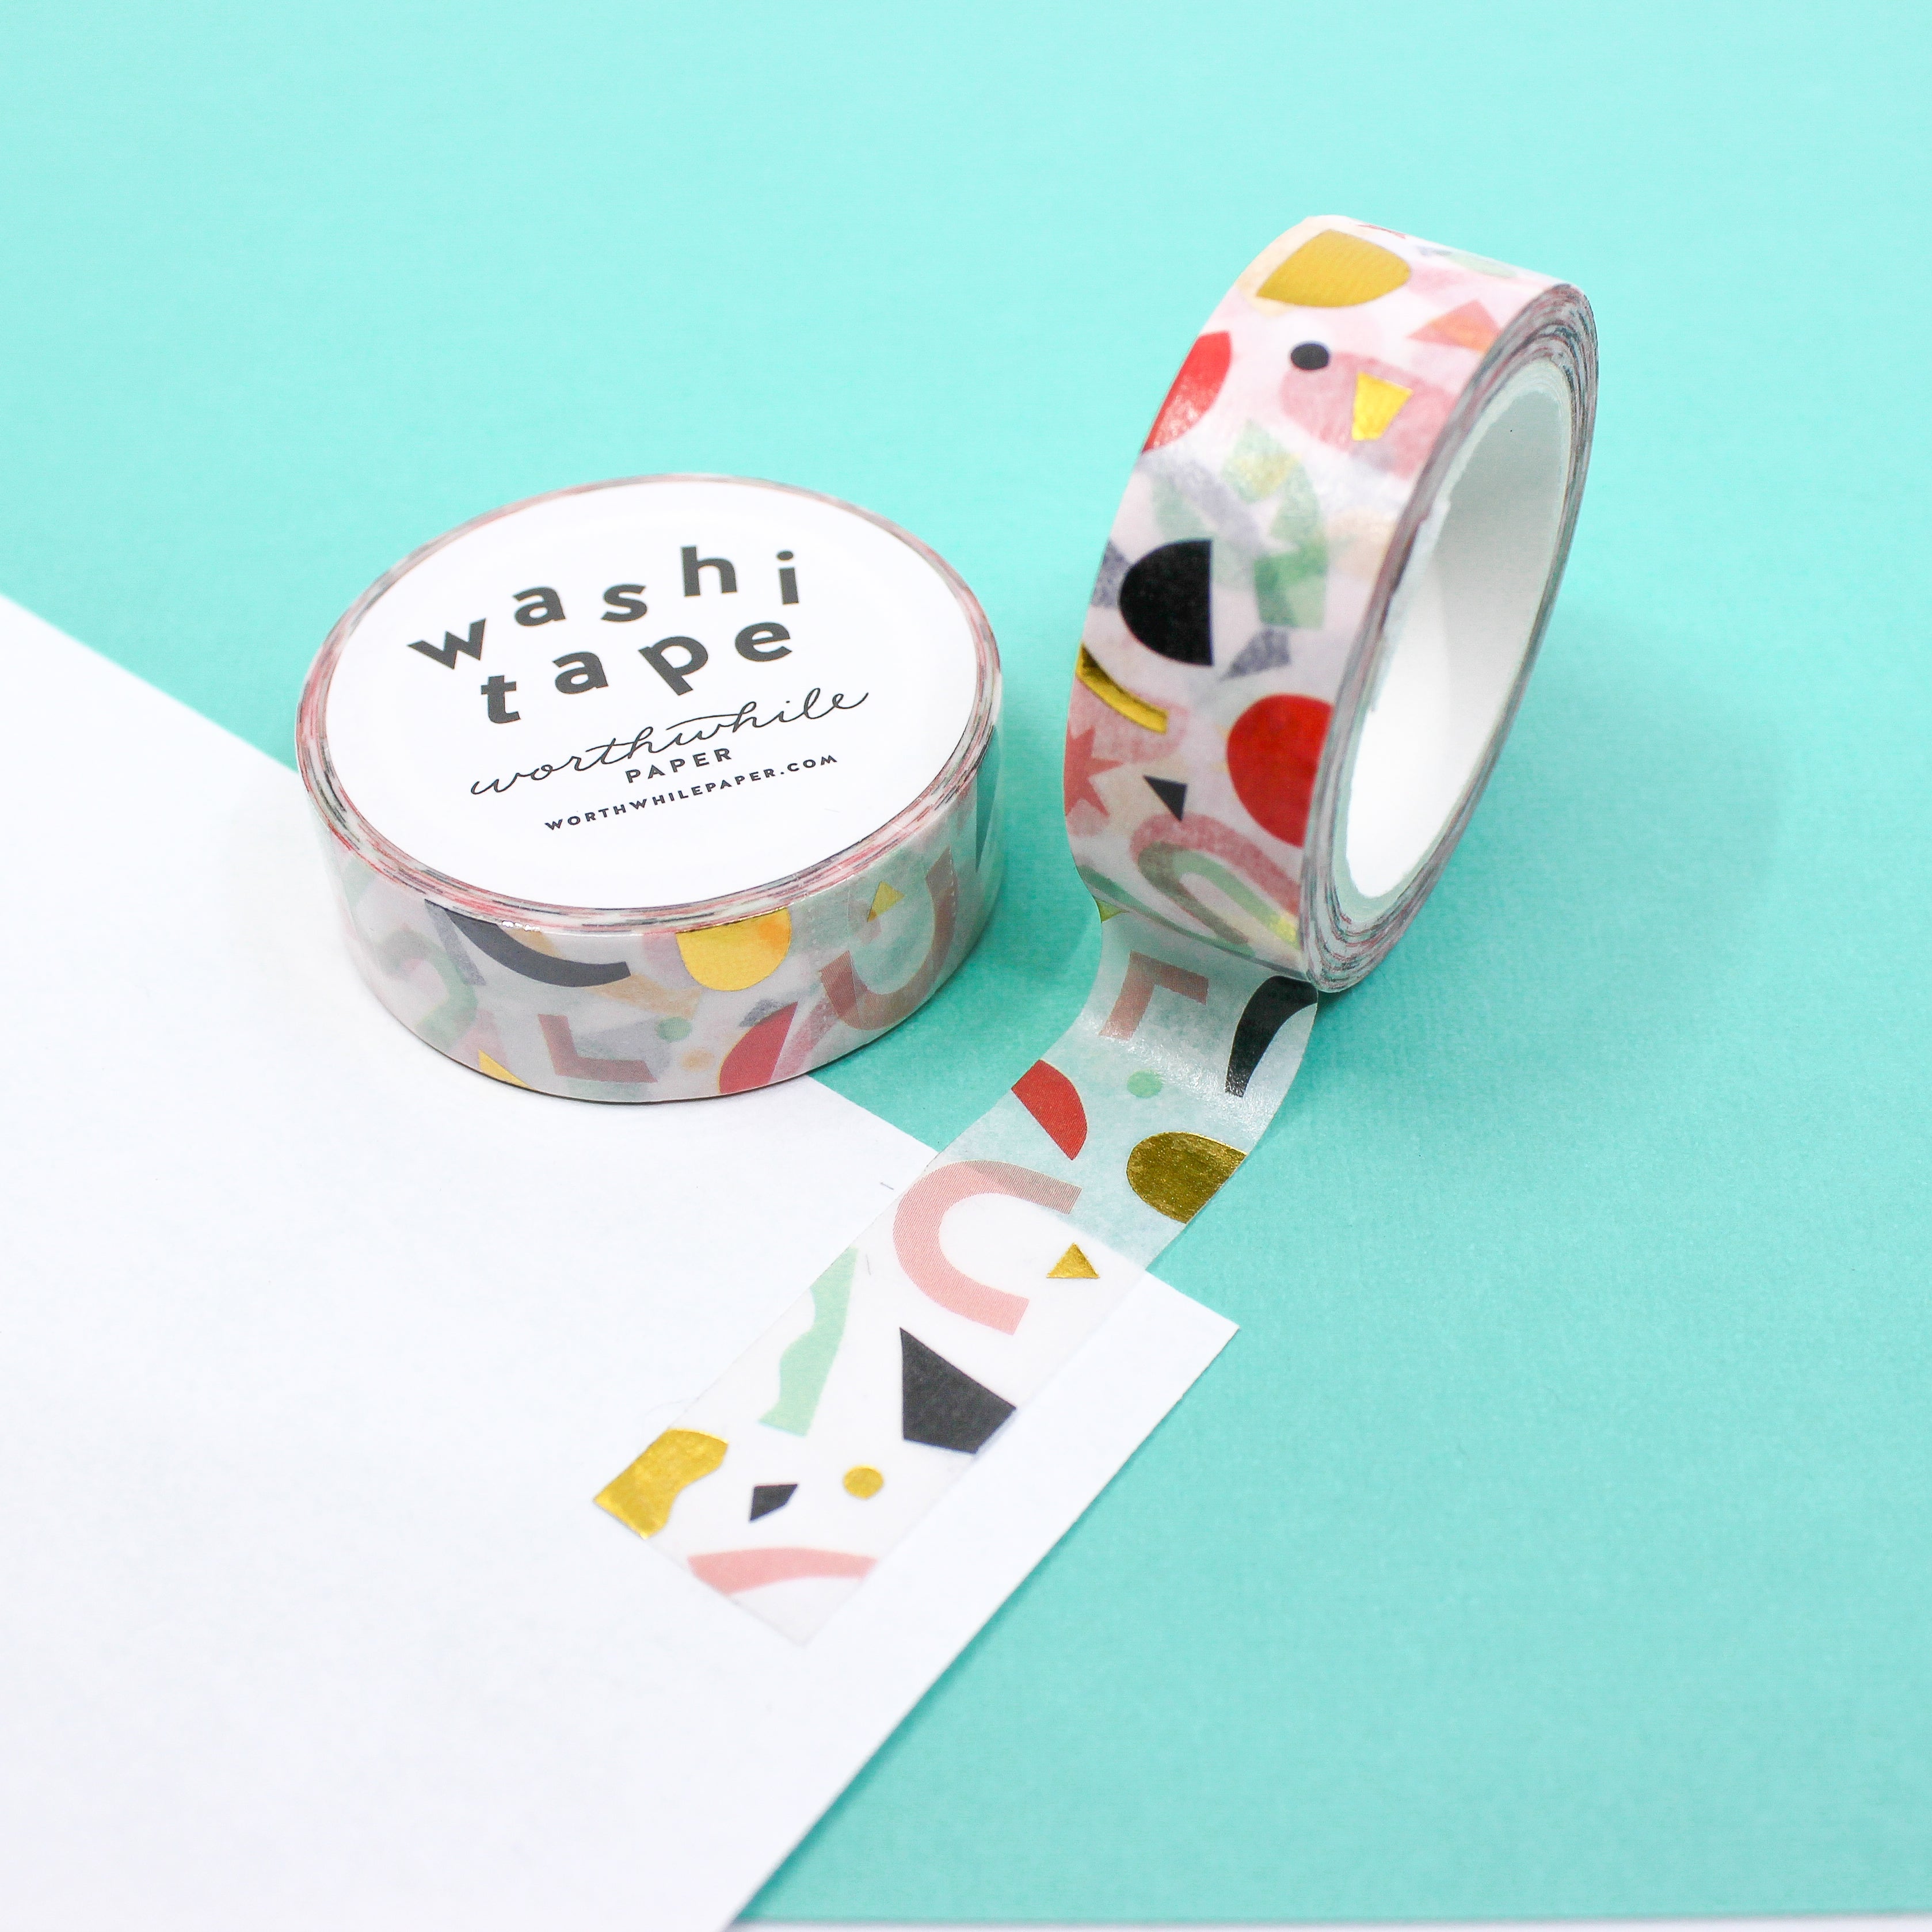 This photo shows a colorful and vibrant randoms shapes confetti style washi tape from bbb supplies craft shop.